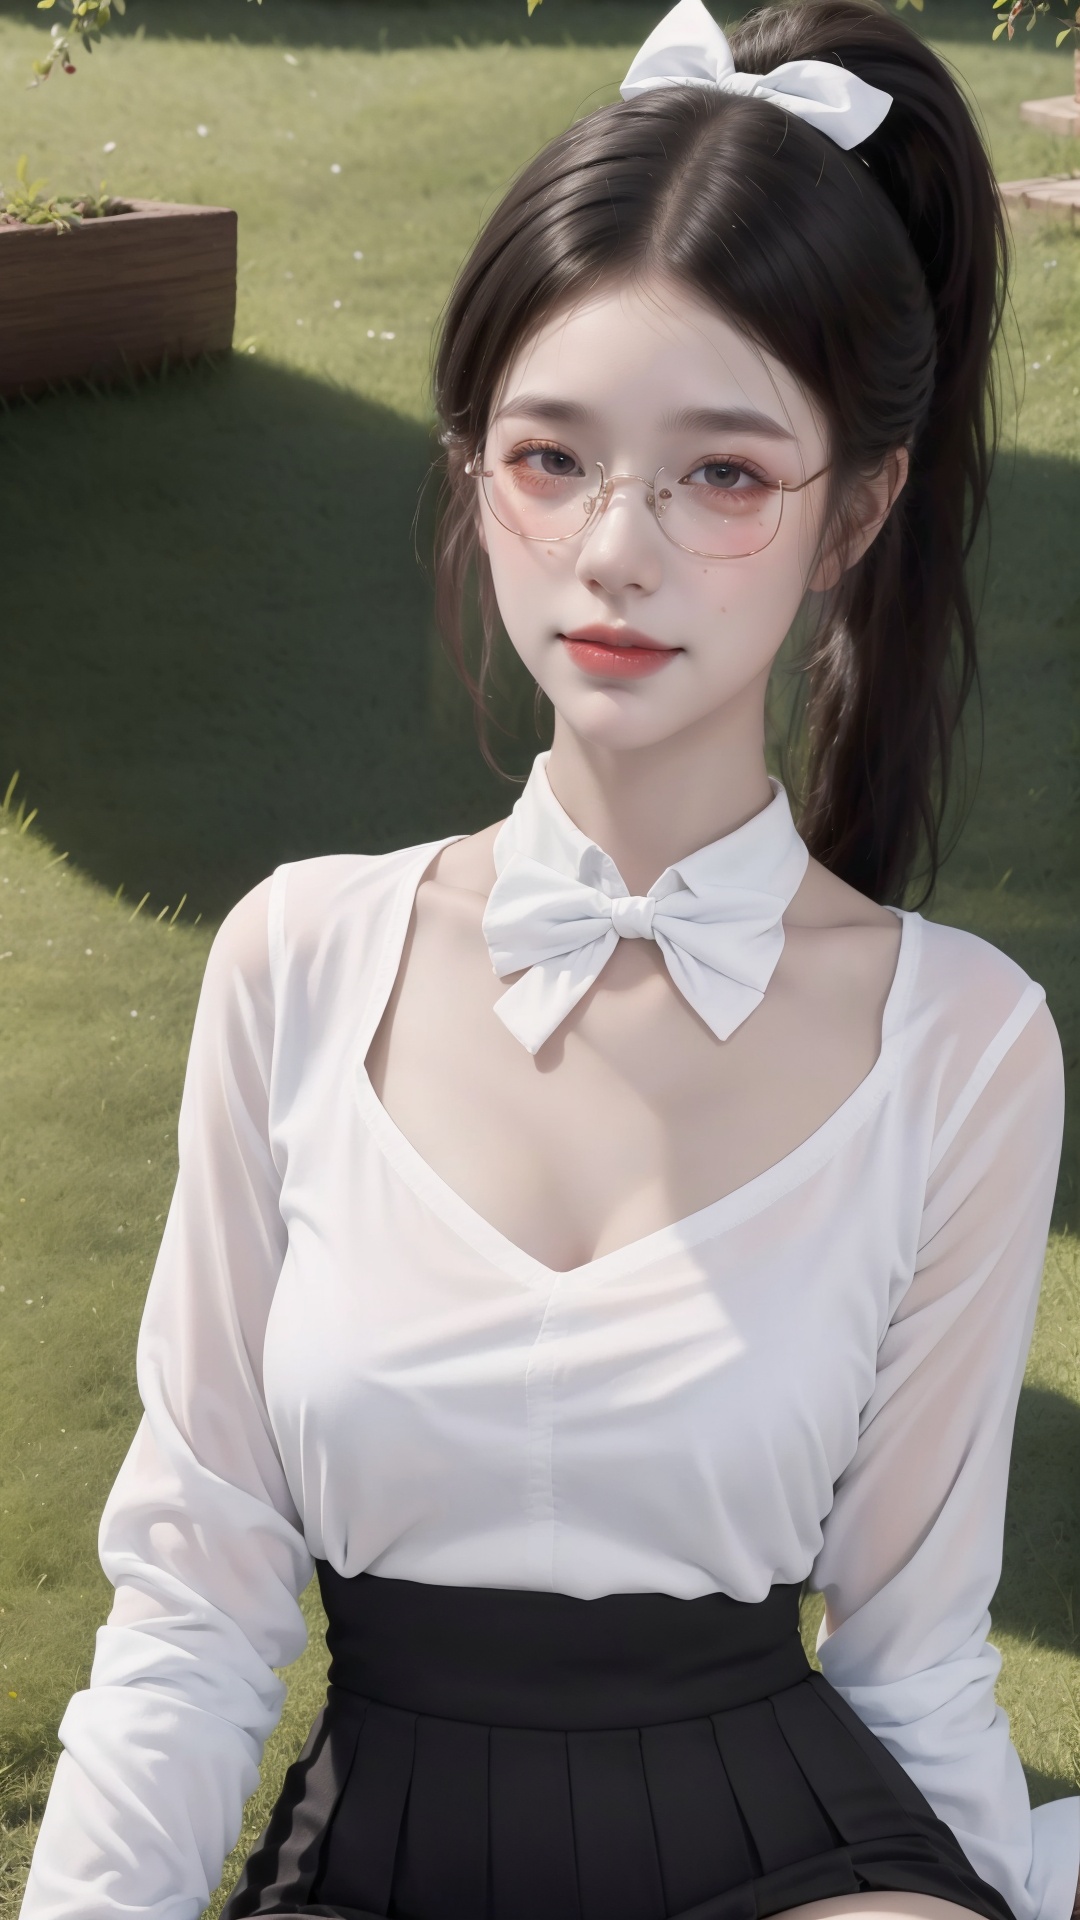  A girl, half-length, exposed thighs, high ponytail hairstyle, long hair, wearing a white shirt, bow tie, black high-waisted pleated skirt, exposed thighs, exquisite facial features, big eyes, exquisite eye makeup,, tears, smiles, and looks at the audience.
( Best Quality: 1.2 ), ( Ultra HD: 1.2 ), ( Ultra-High Resolution: 1.2 ), ( CG Rendering: 1.2 ), Wallpaper, Masterpiece, ( 36K HD: 1.2 ), ( Extra Detail: 1.1 ), Ultra Realistic, ( Detail Realistic Skin Texture: 1.2 ), ( White Skin: 1.2 ), Focus, Realistic Art, white shirt, liuguang, white shirt_eyeglasses